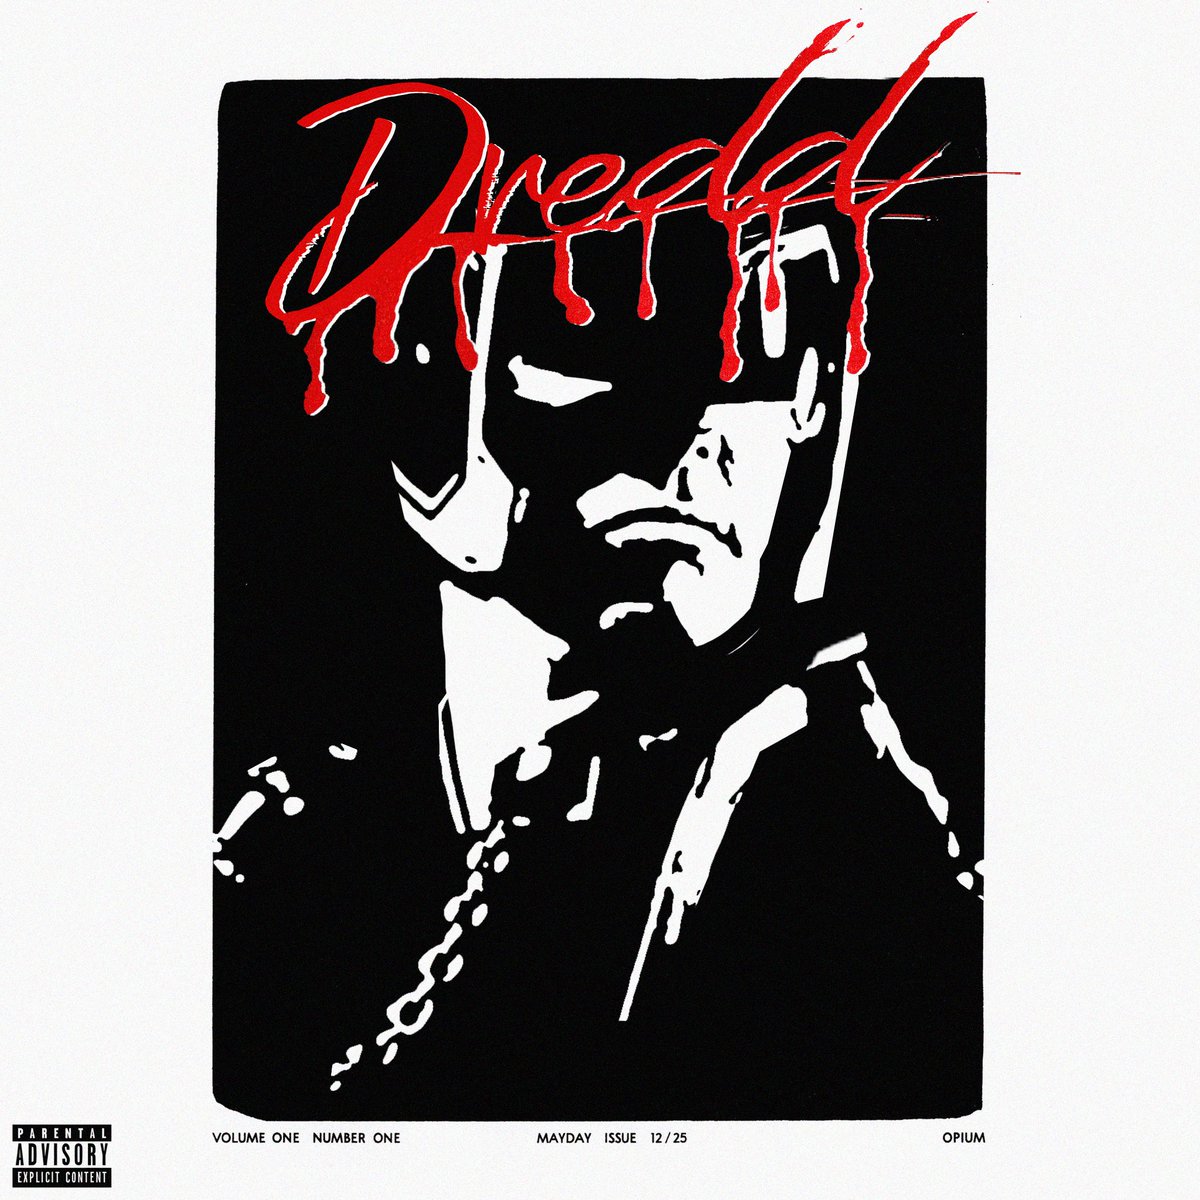 Joining in the fun @playboicarti whole Lot Of Dredd #wholelottared 